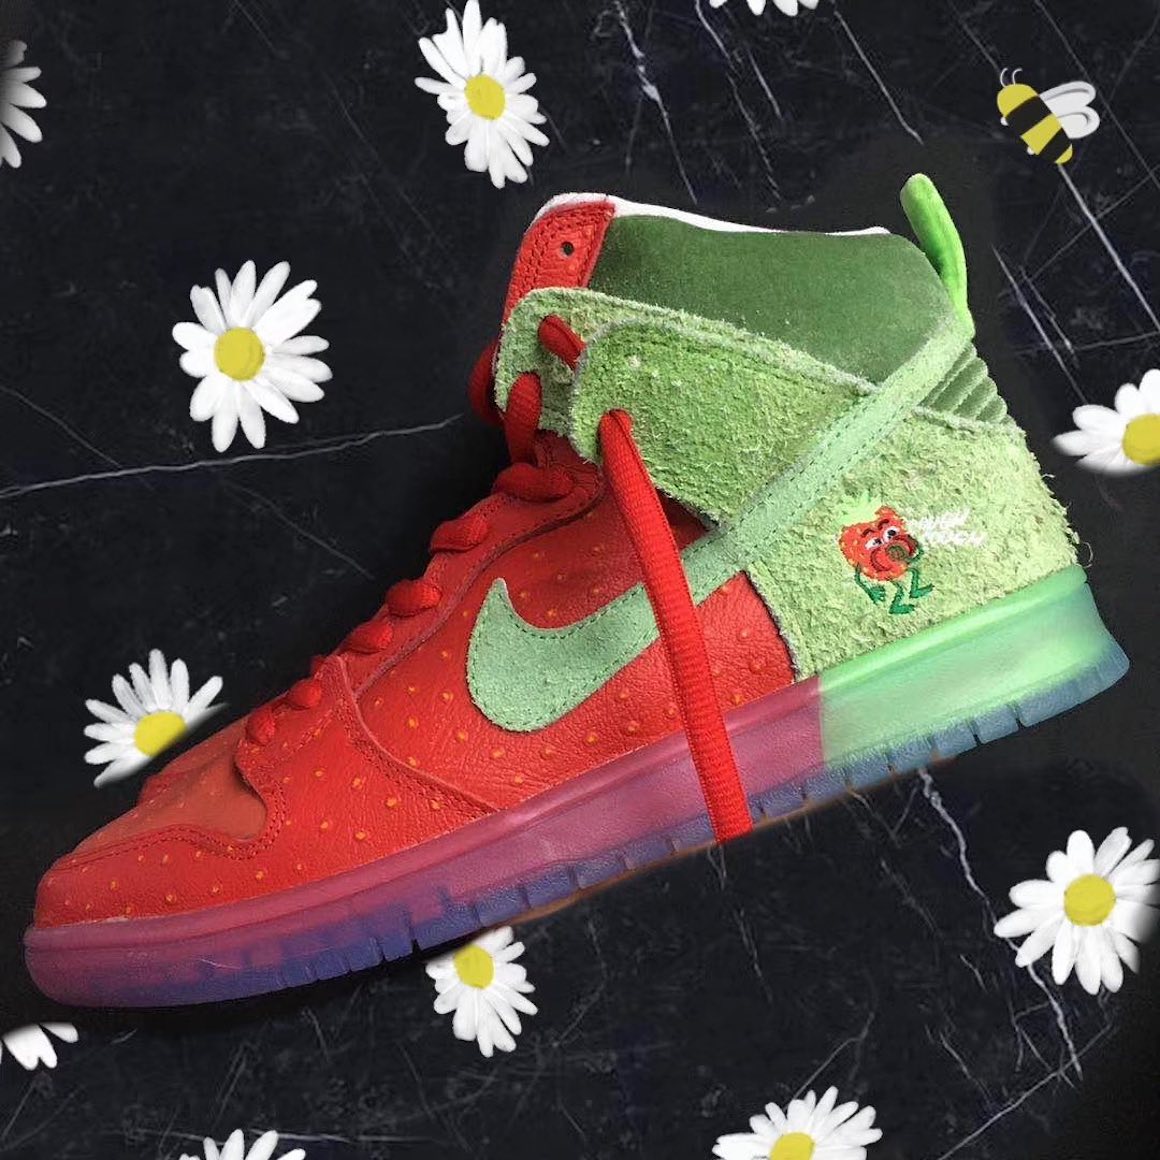 strawberry cough sb release date